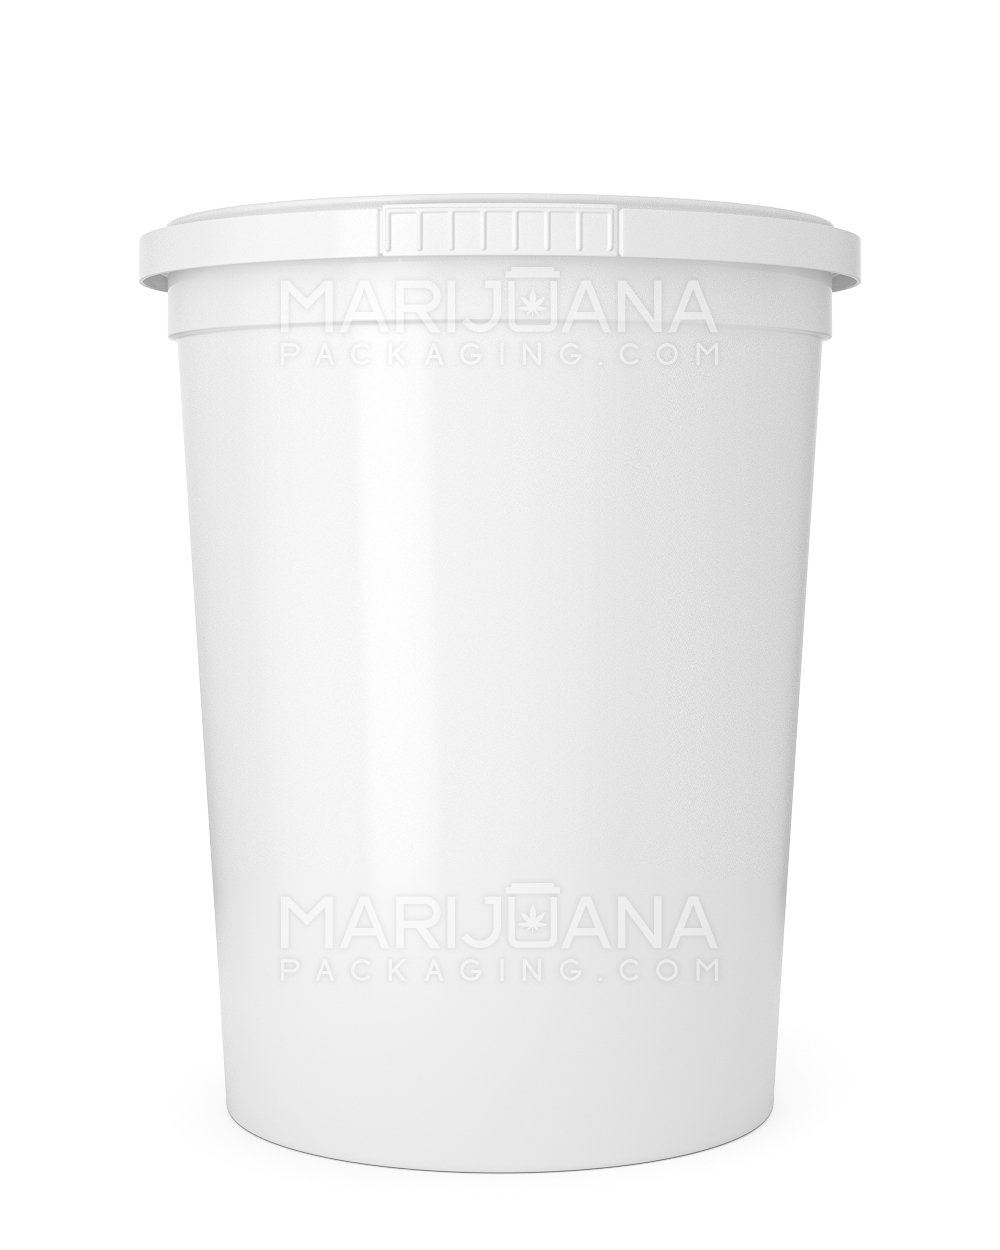 16 oz White PP Deli Containers (Heavy Wall)